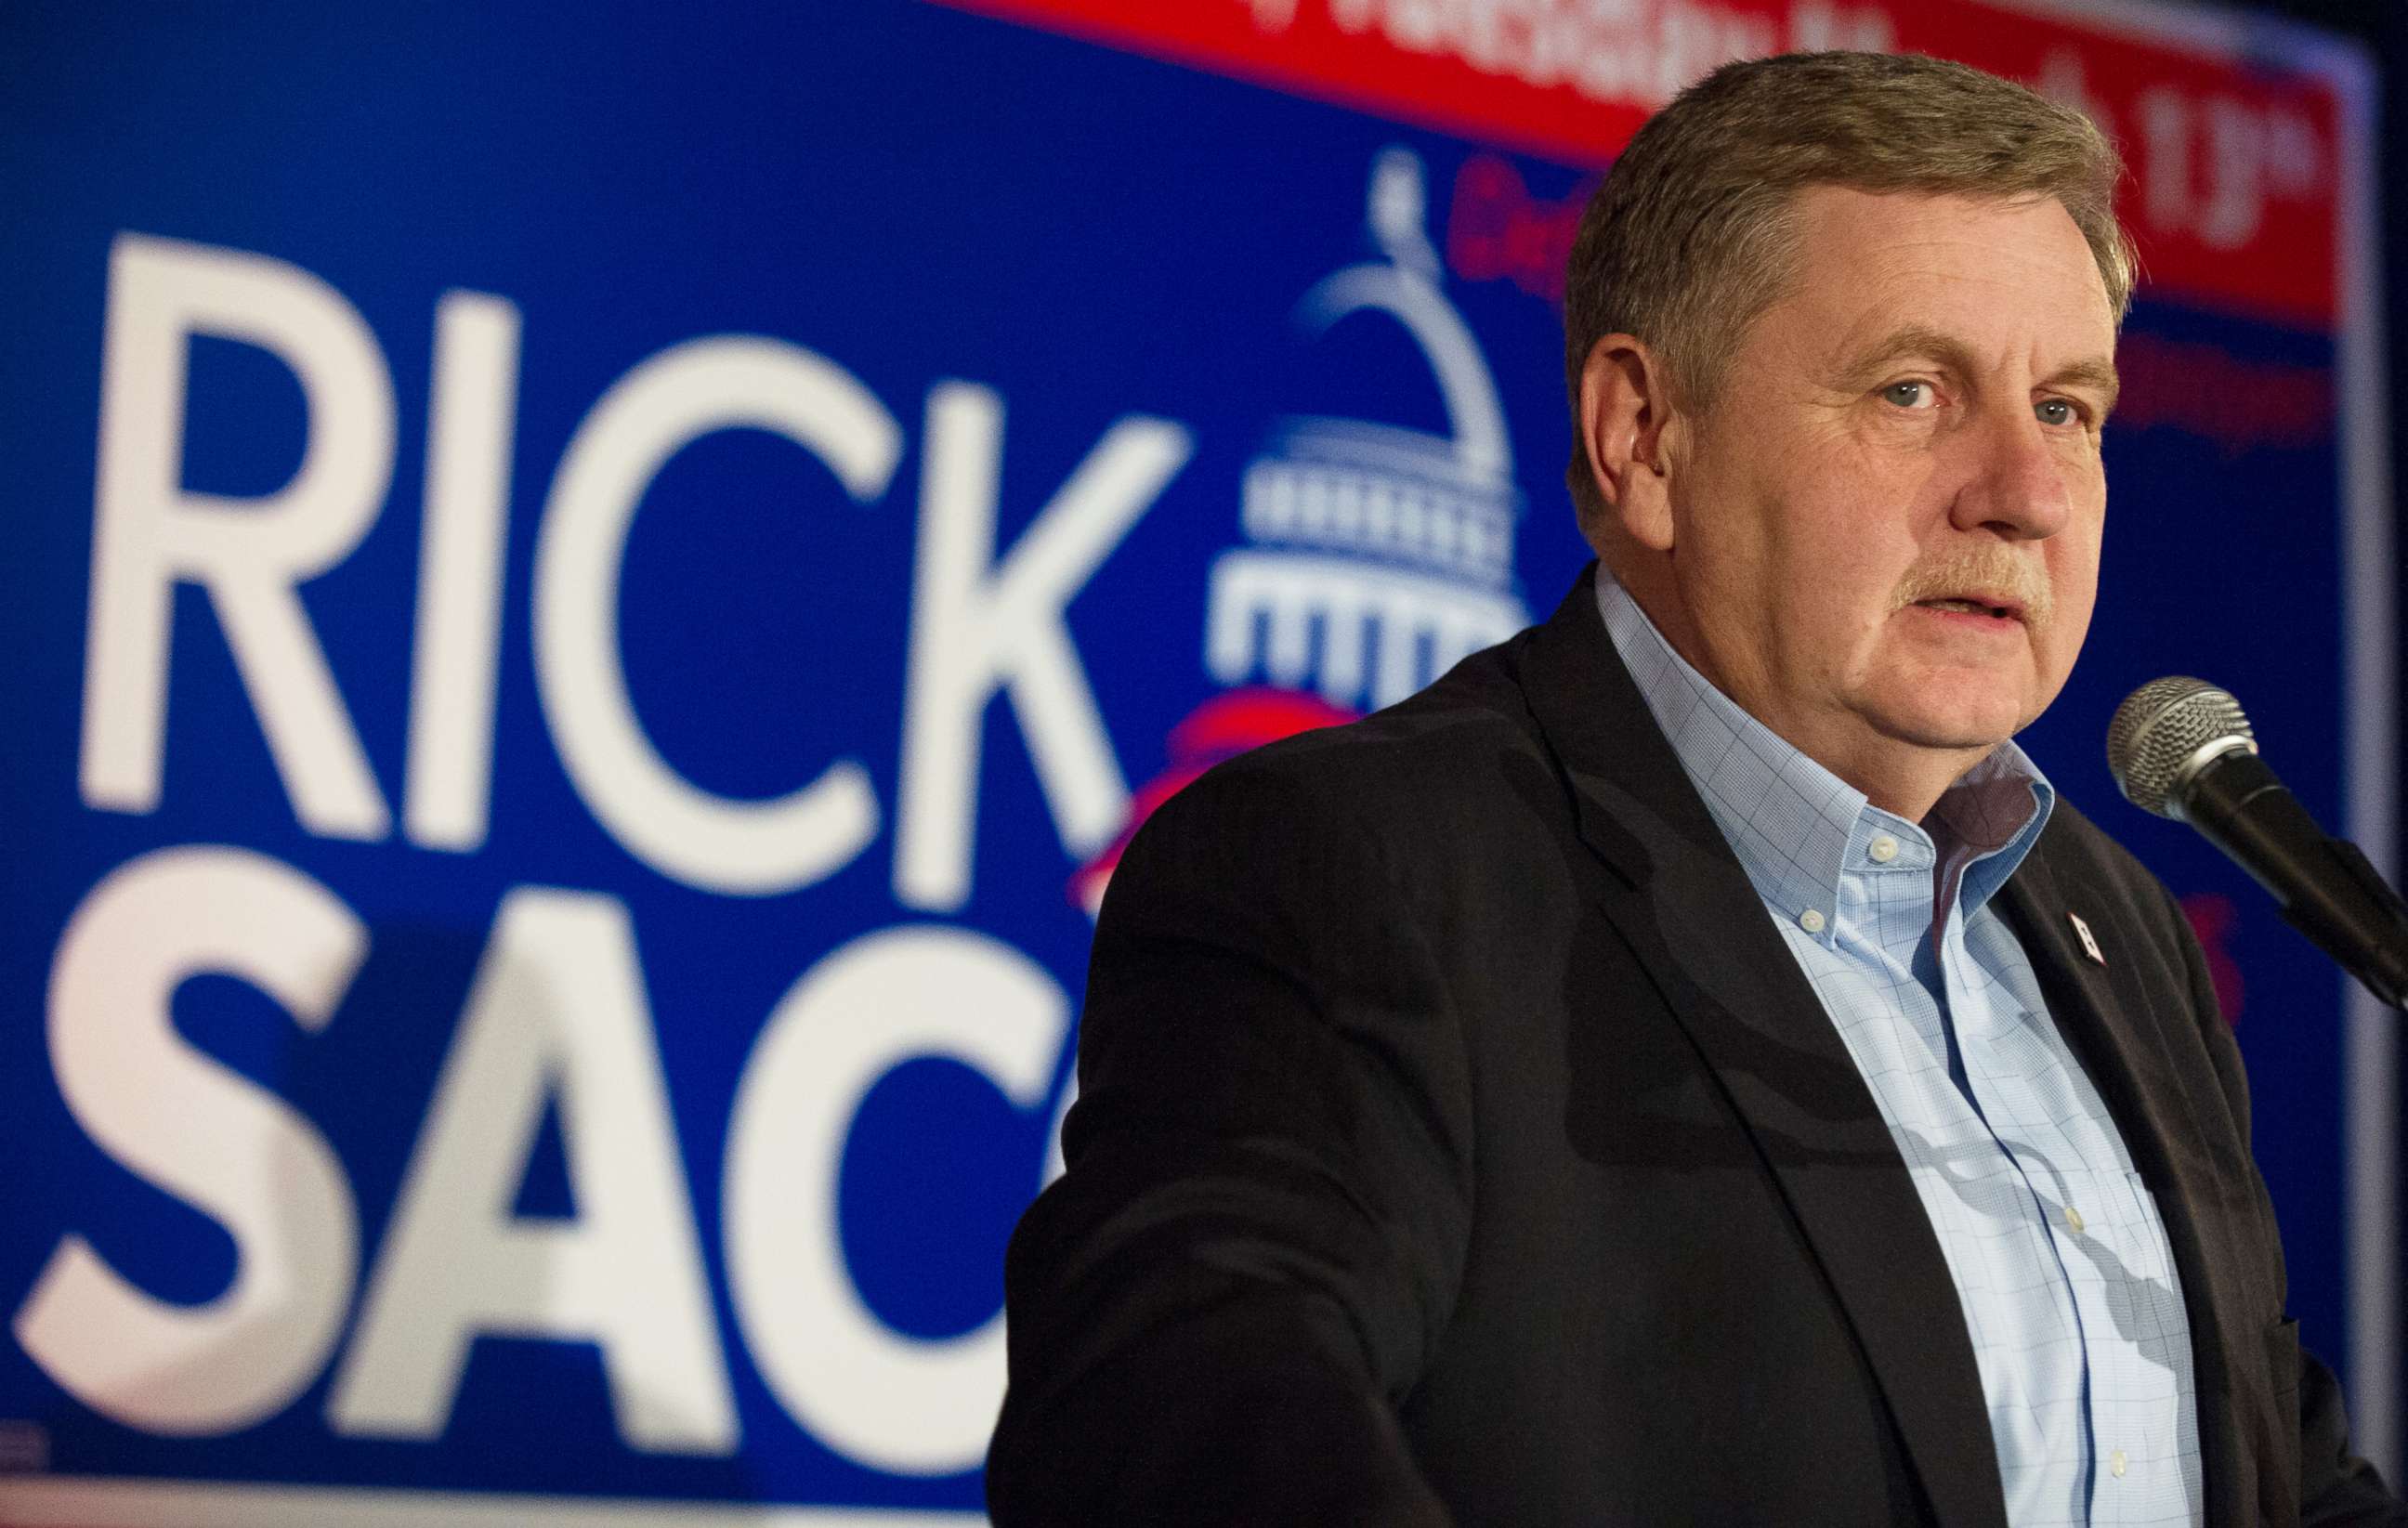 PHOTO: Rick Saccone speaks to supporters on March 13, 2018 at the Youghiogheny Country Club in Elizabeth Township, Pa.